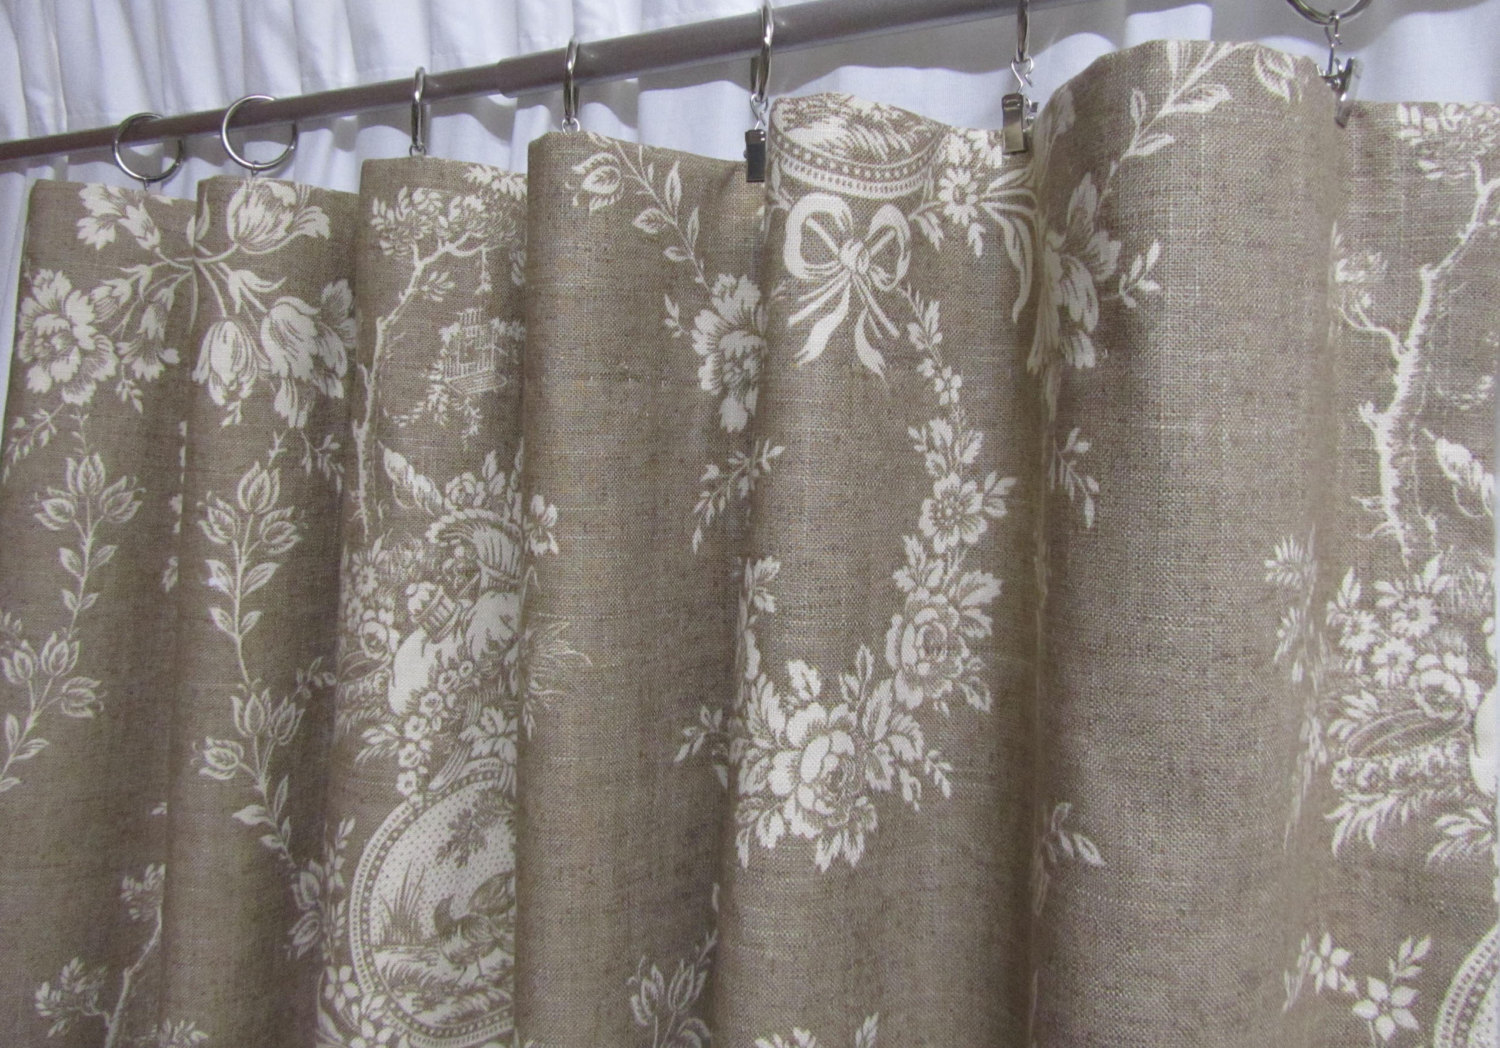 Modern French Country Curtains, Neutral Toile Drapes, Linen-Colored Window Curtains,  Shabby Chic, French french toile curtains